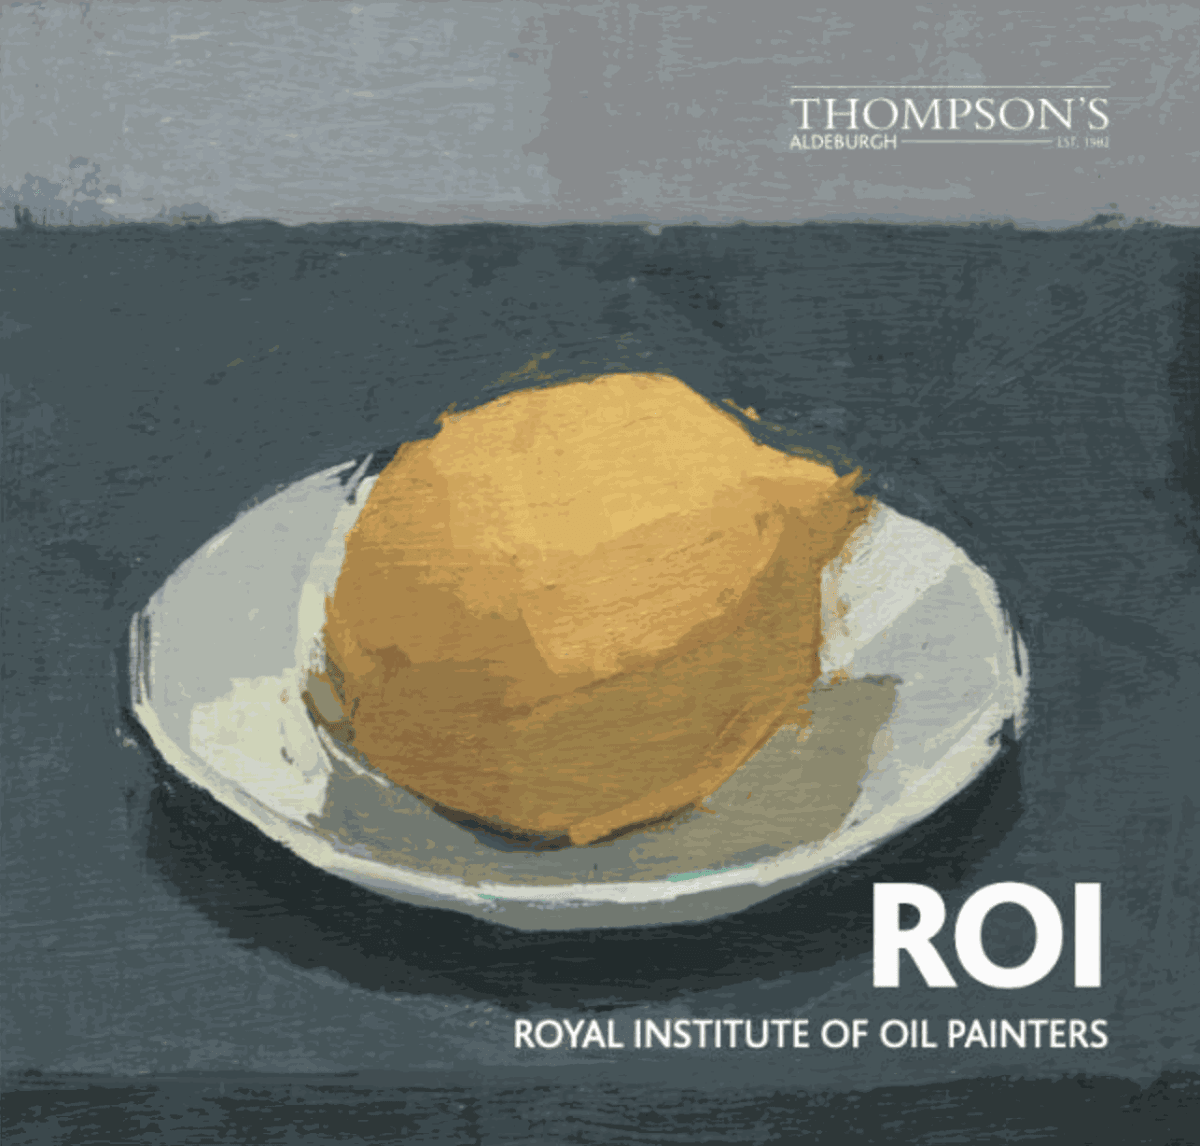 The Royal Institute of Oil Painters (ROI)